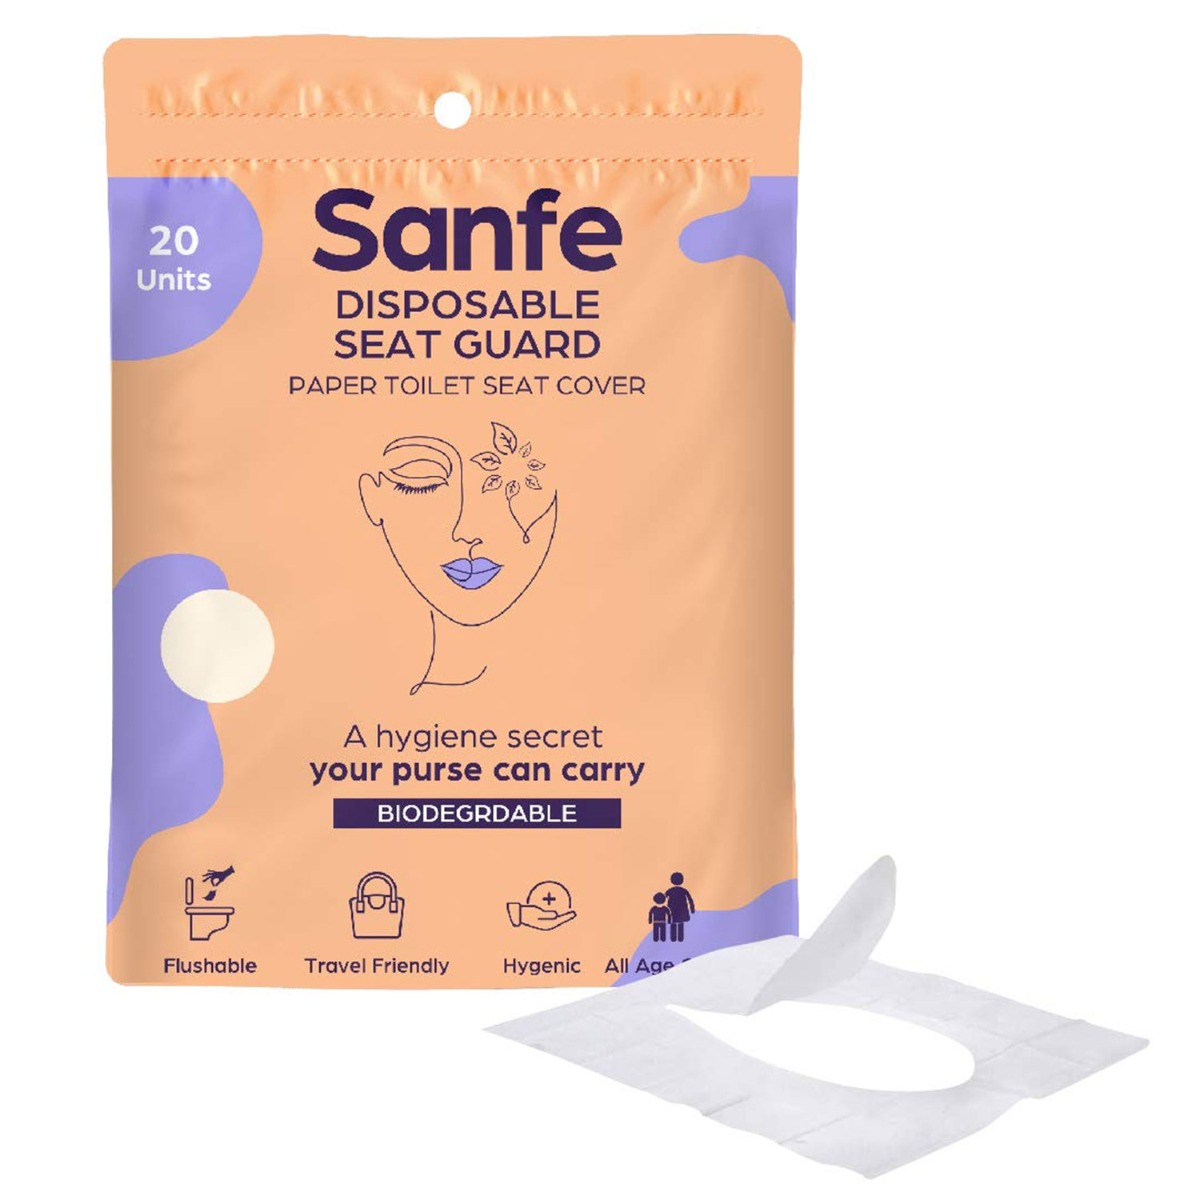 Sanfe Seat Guard - Disposable, Biodegradable Toilet Seat Cover (Paper) - 20 units - No direct contact with unhygienic public toilet seat